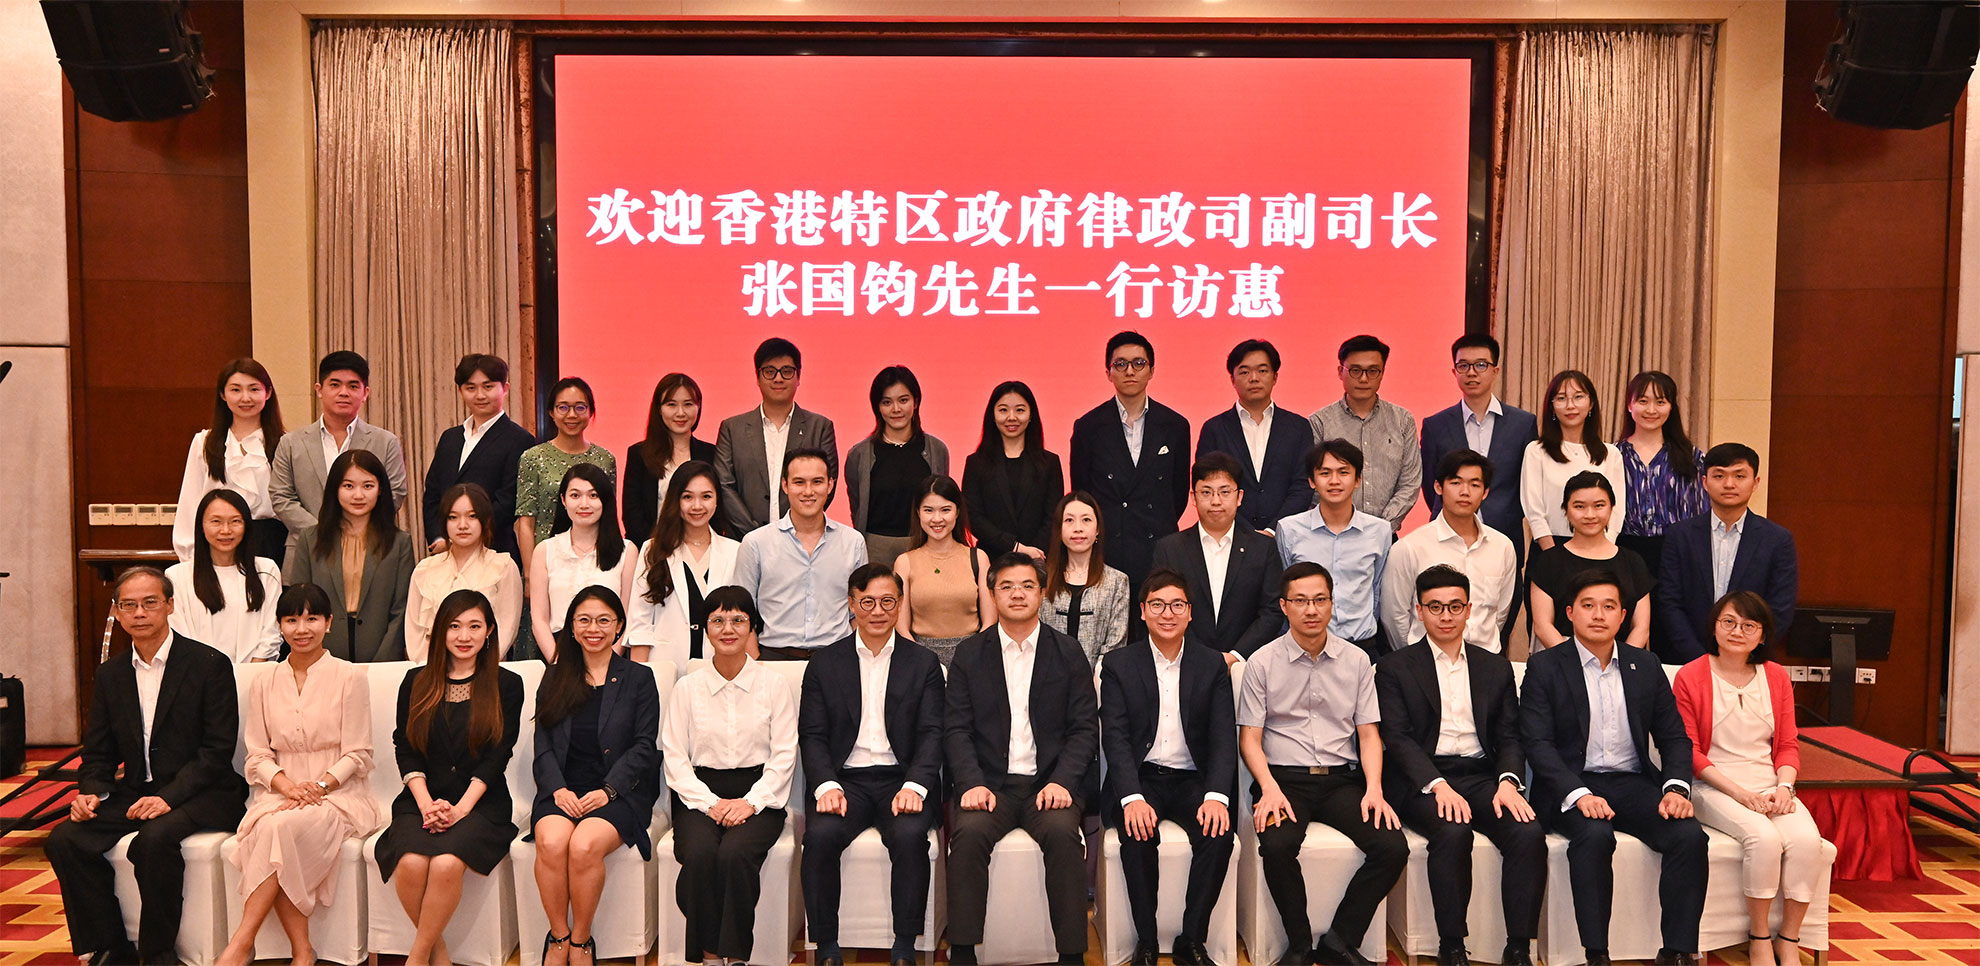 The Deputy Secretary for Justice, Mr Cheung Kwok-kwan (front row, sixth left), led a delegation comprising young lawyers and law students to meet with Standing Committee Member and Head of the United Front Work Department of the CPC Huizhou Municipal Committee, Mr Lai Jianhua (front row, sixth right), for dinner today (September 7).